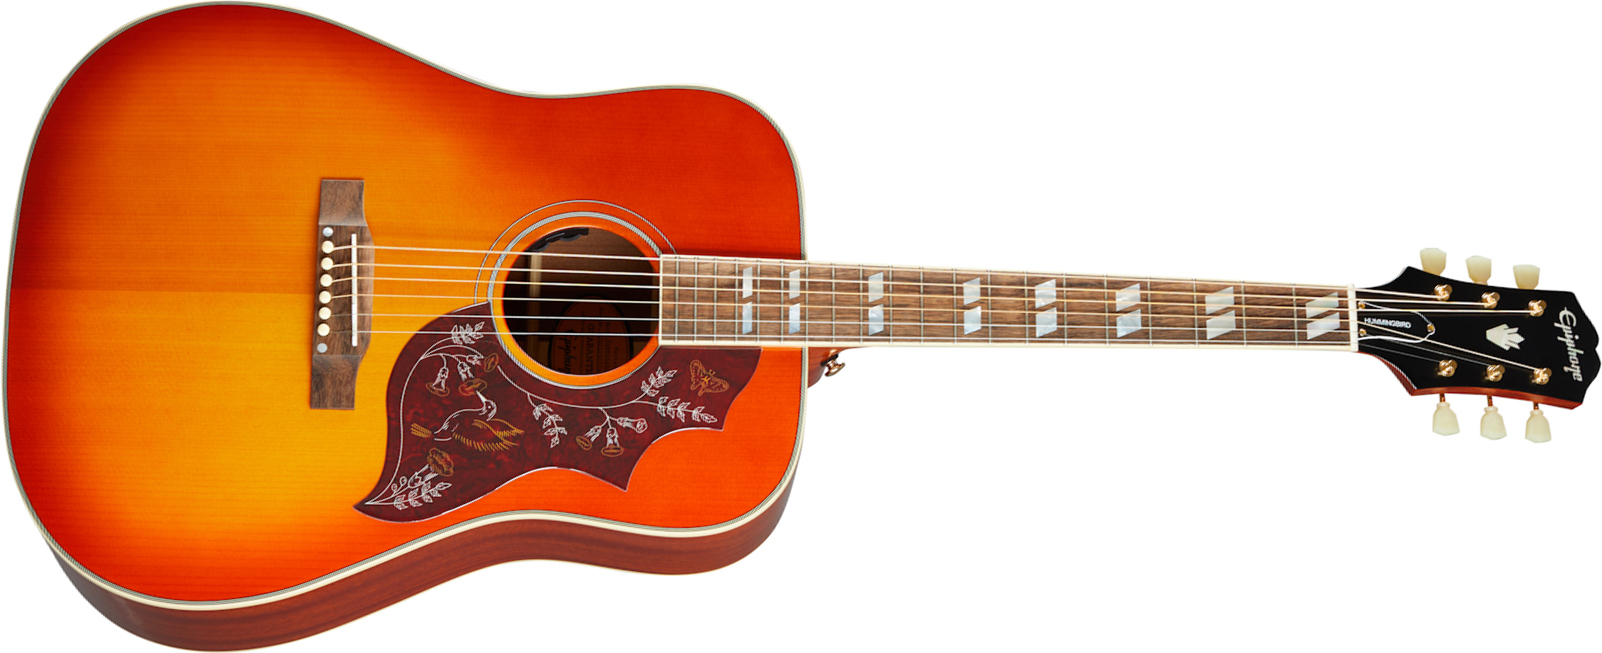 Epiphone Hummingbird Inspired By Gibson Dreadnought Epicea Acajou Lau - Aged Cherry Sunburst - Electro acoustic guitar - Main picture